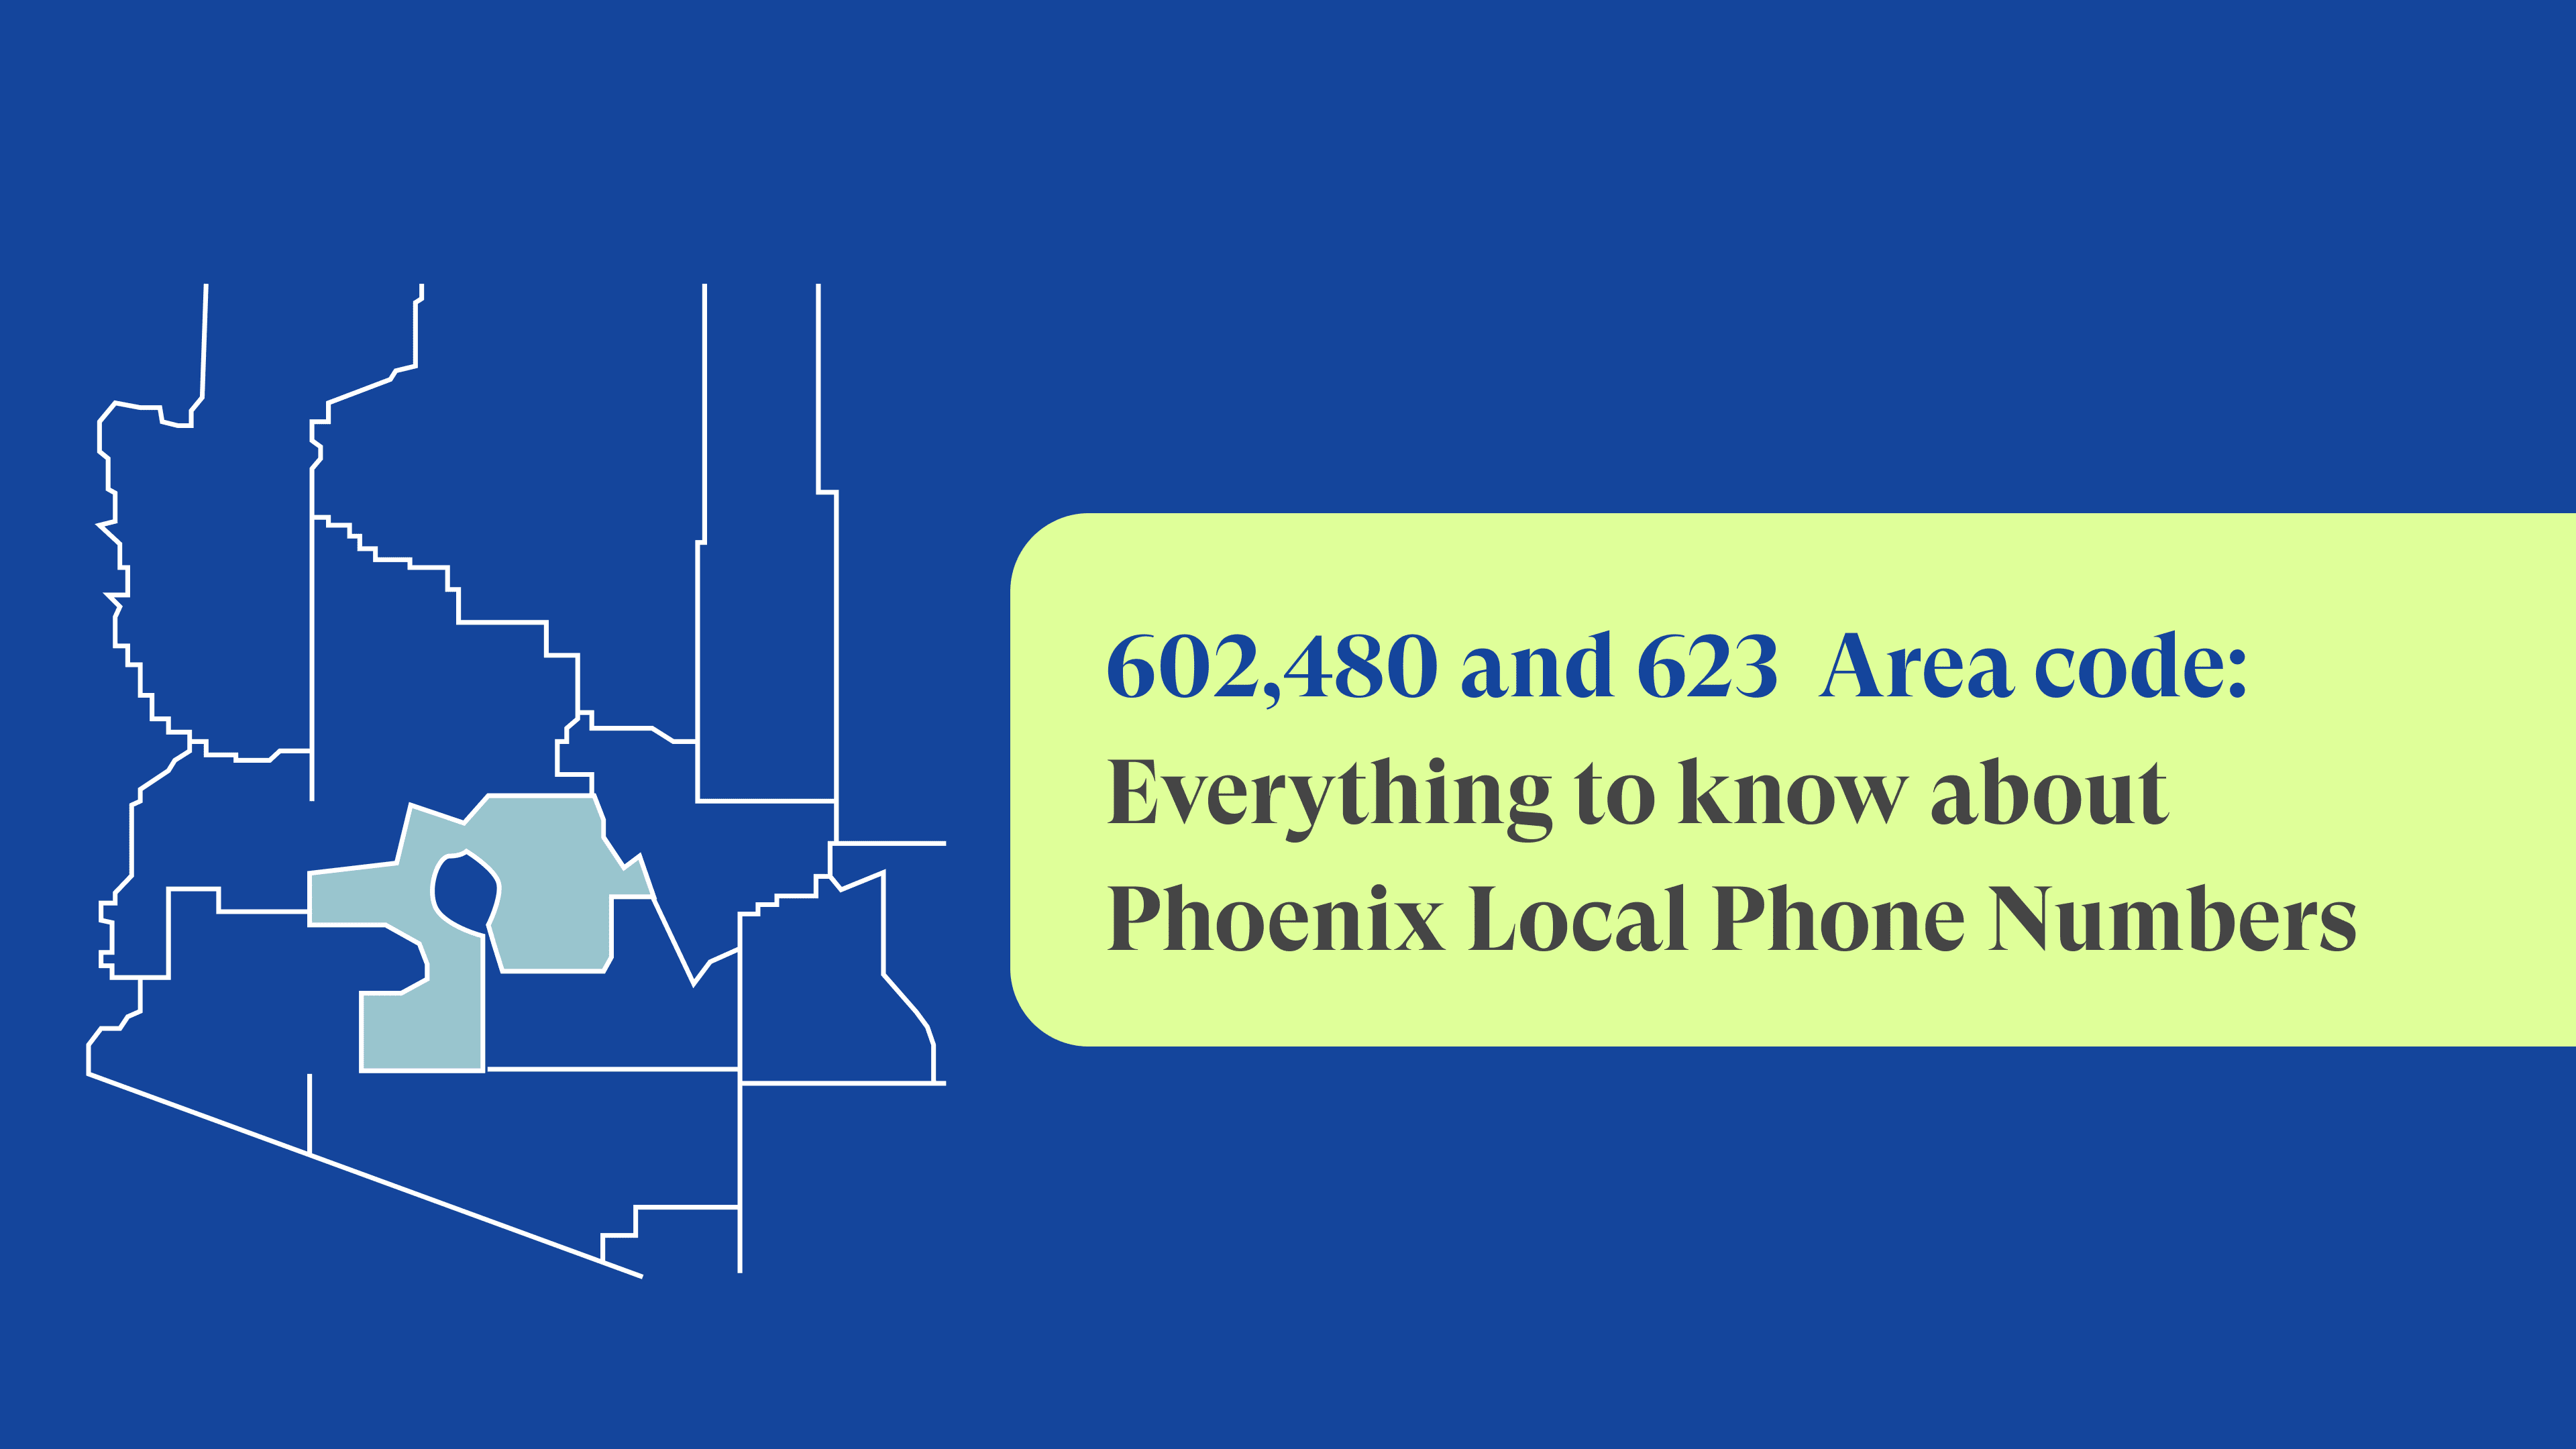 Area Codes 602, 480, And 623: Phoenix Local Phone Numbers